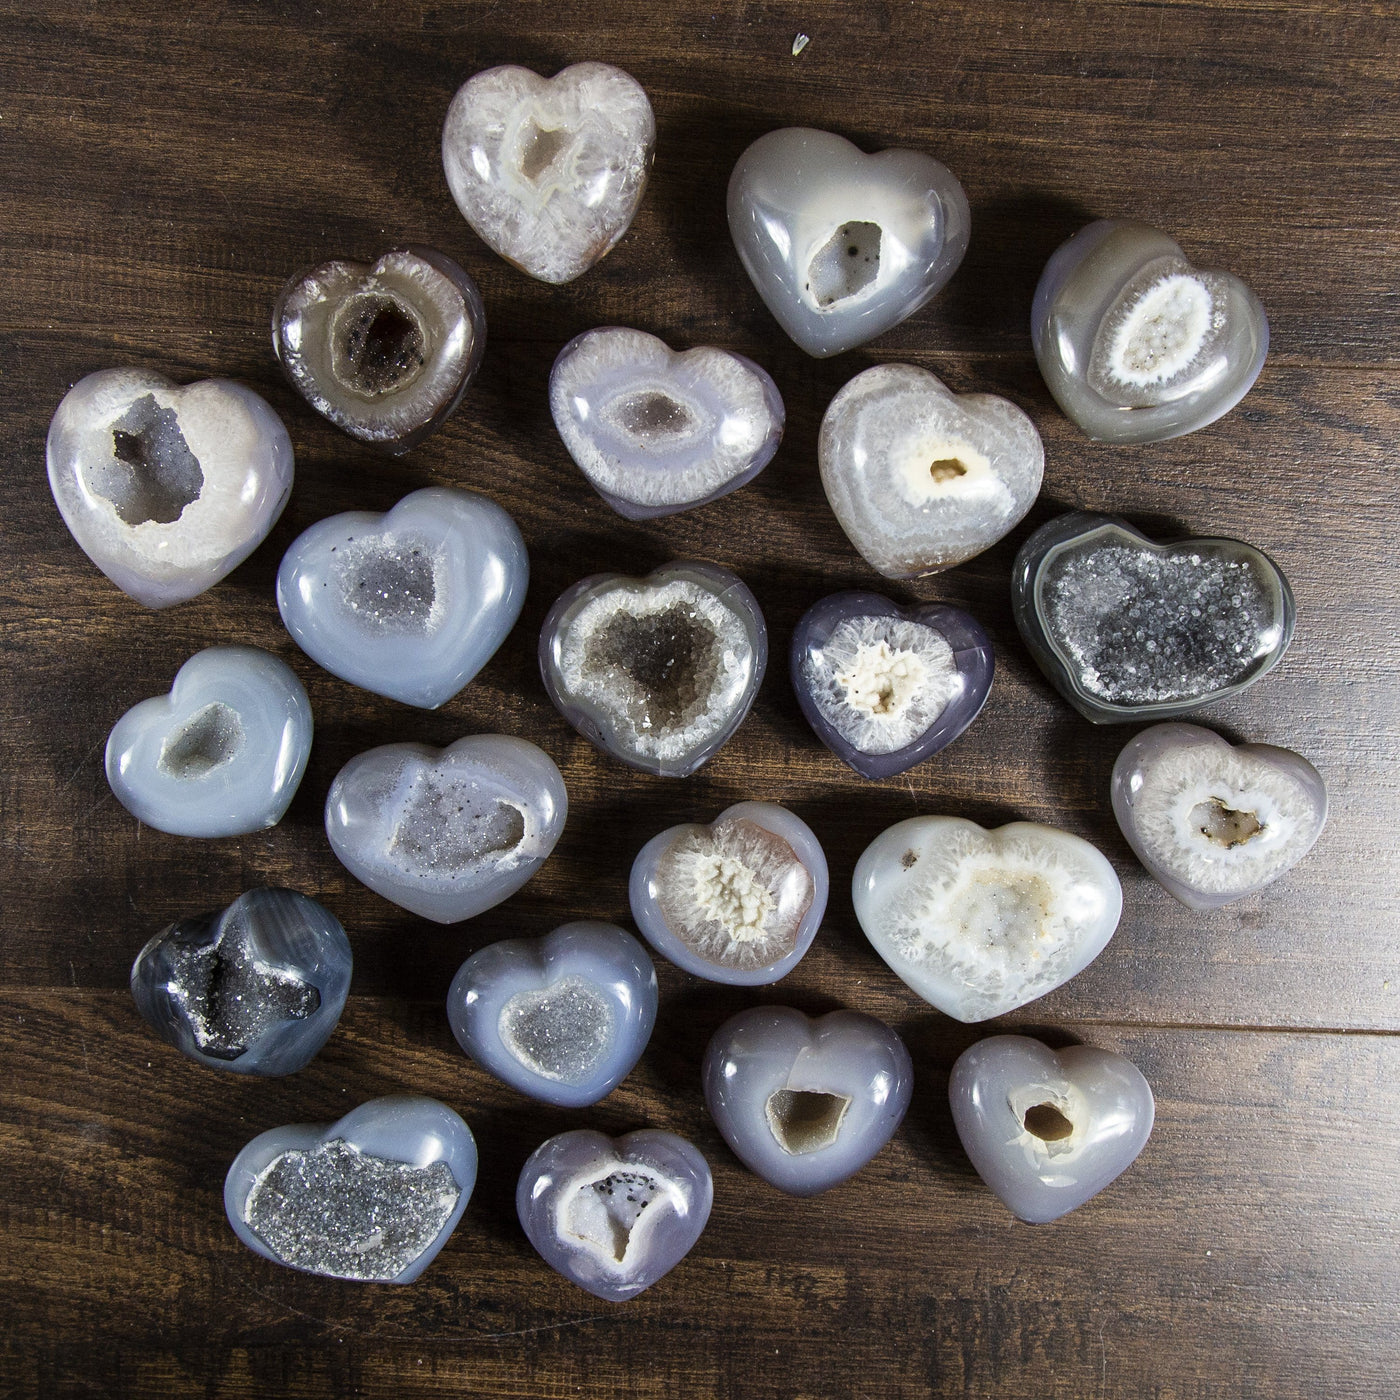 Many agate druzy hearts displayed front facing on a dark background.